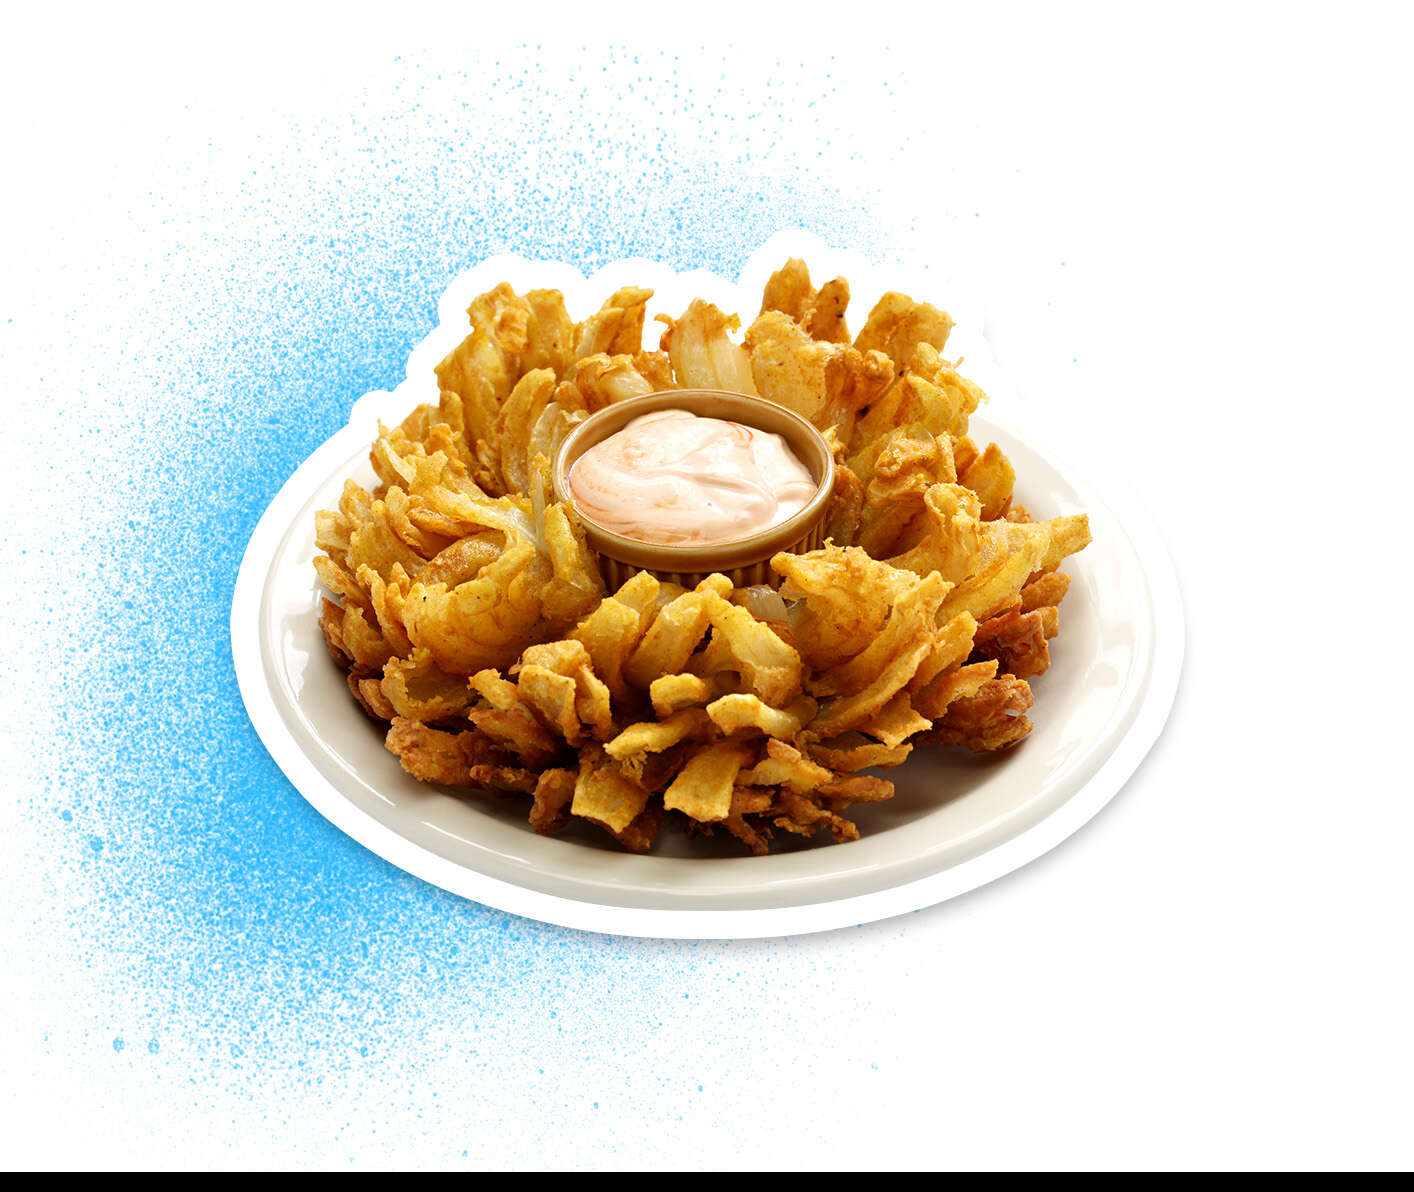 bloomin' onion from Outback Steakhouse